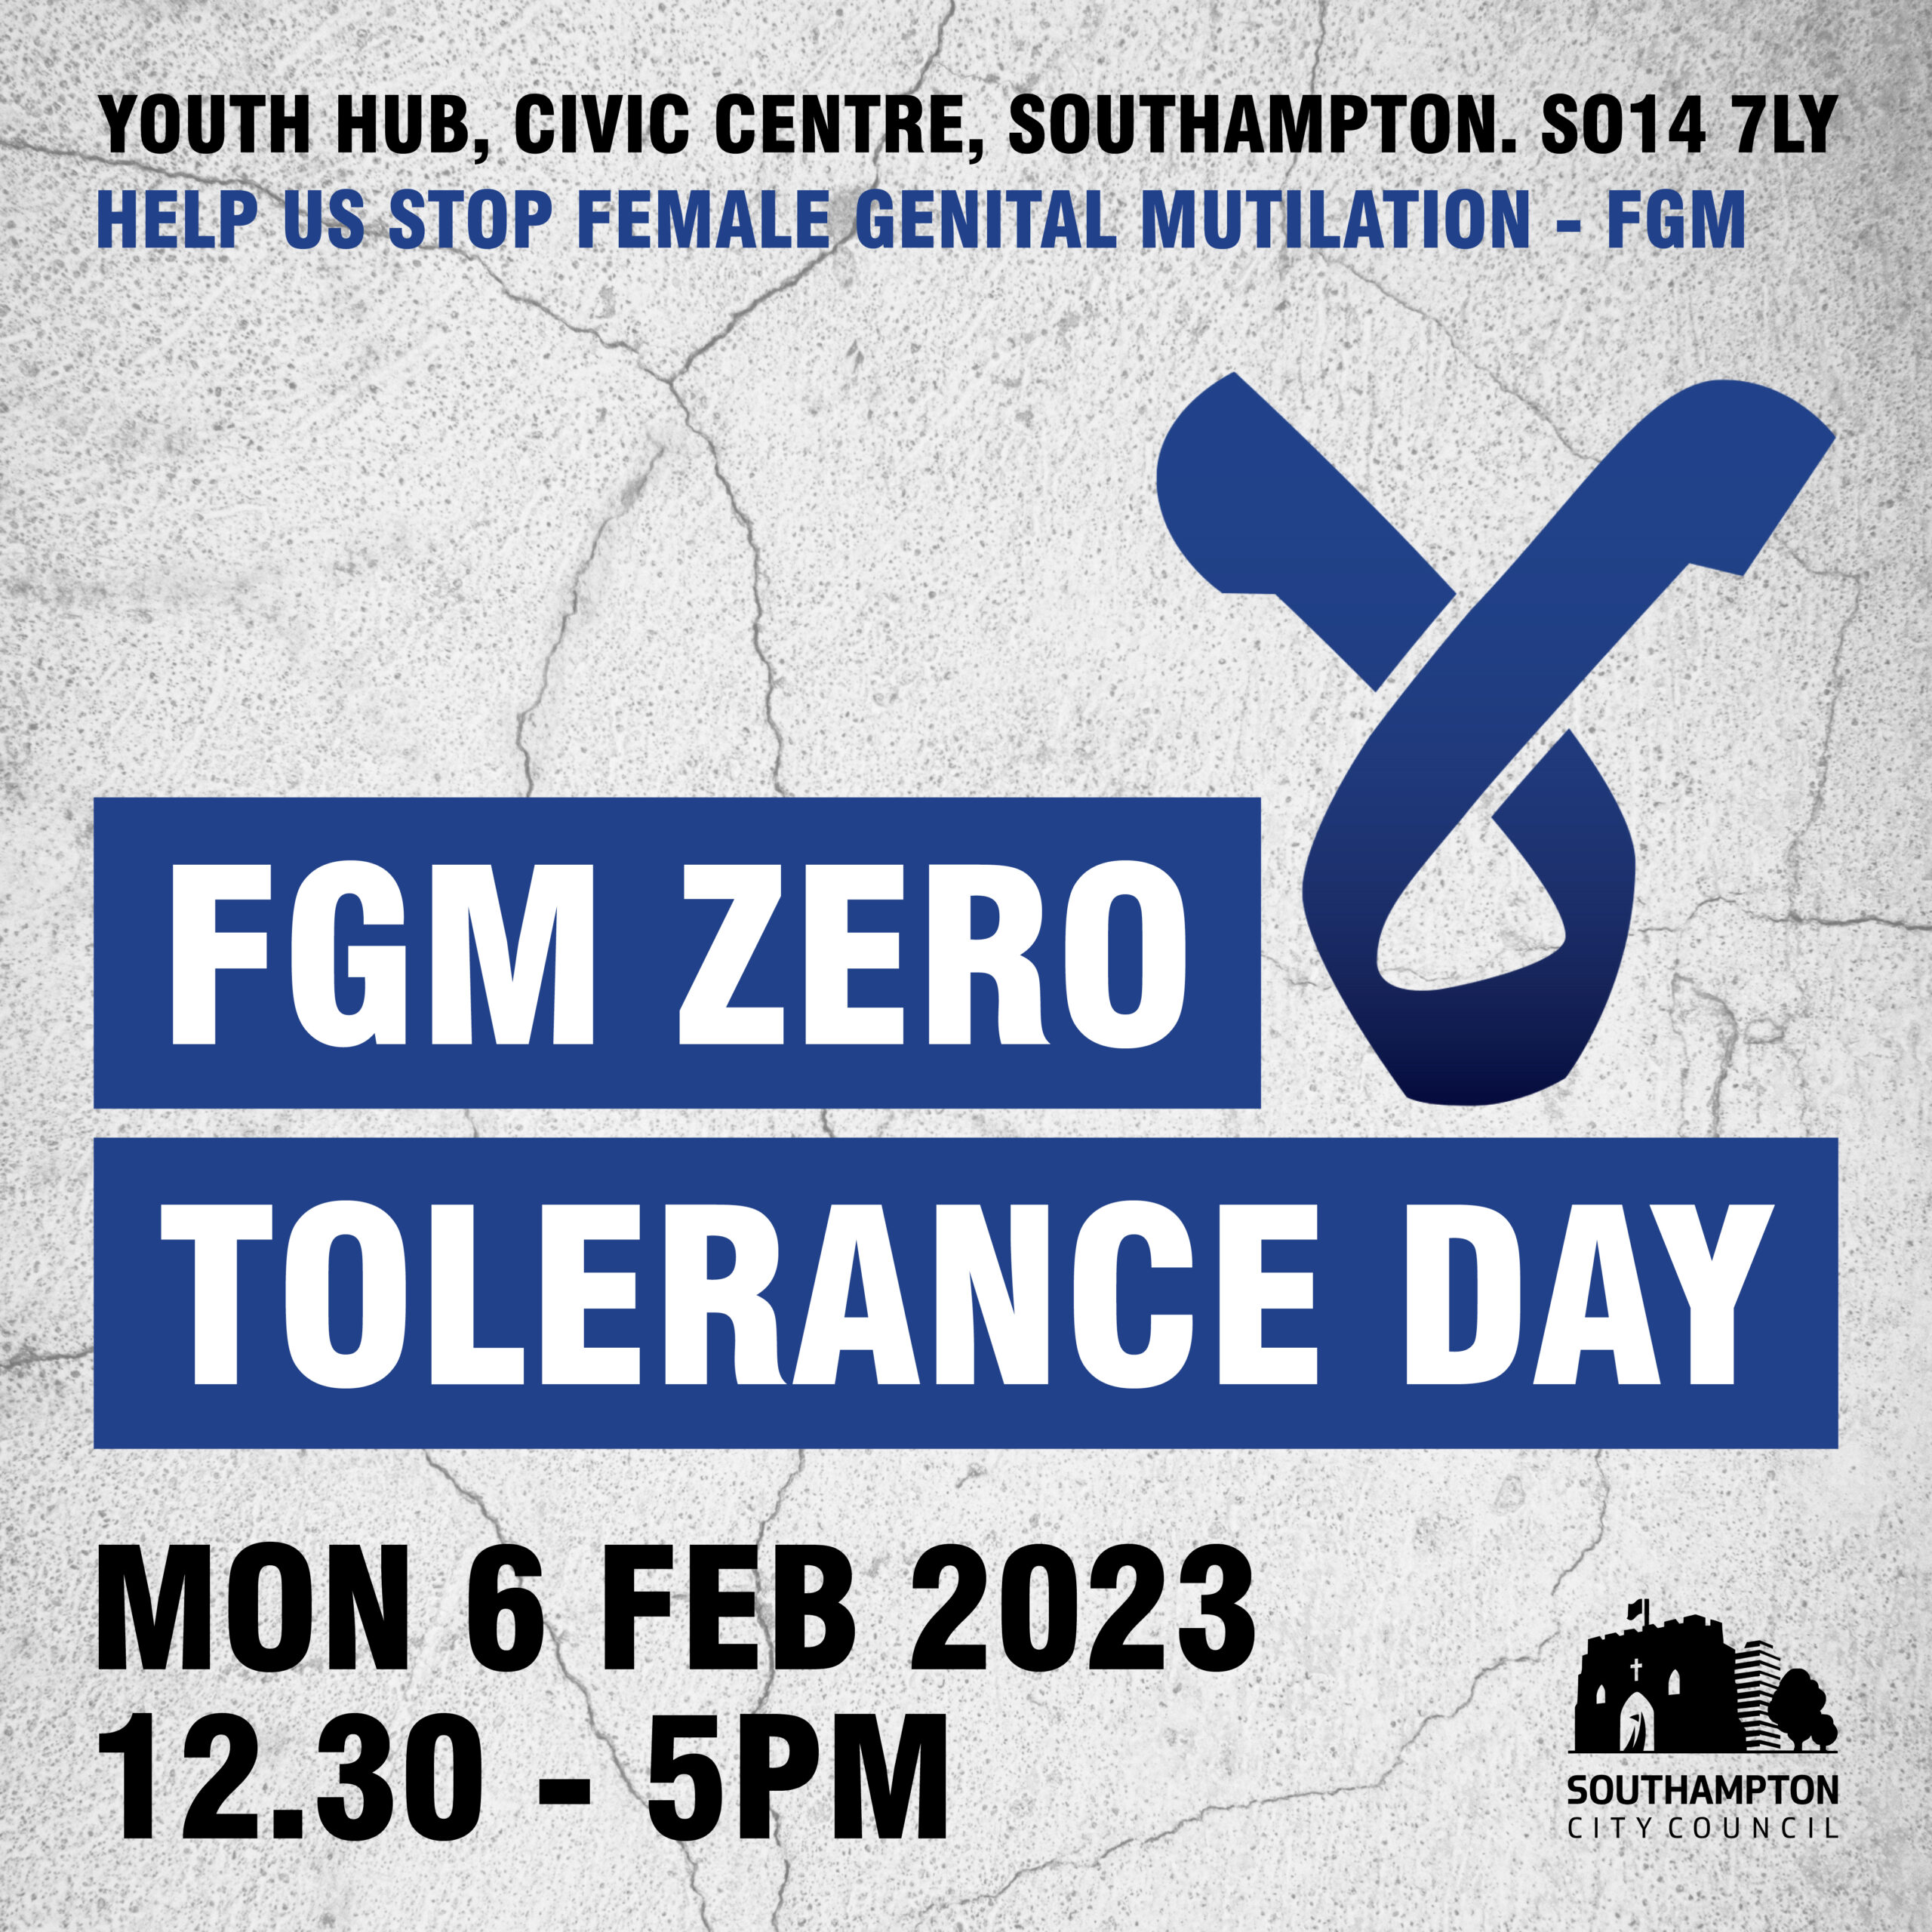 Advertisement of the FGM Zero Tolerance Day event in Southampton